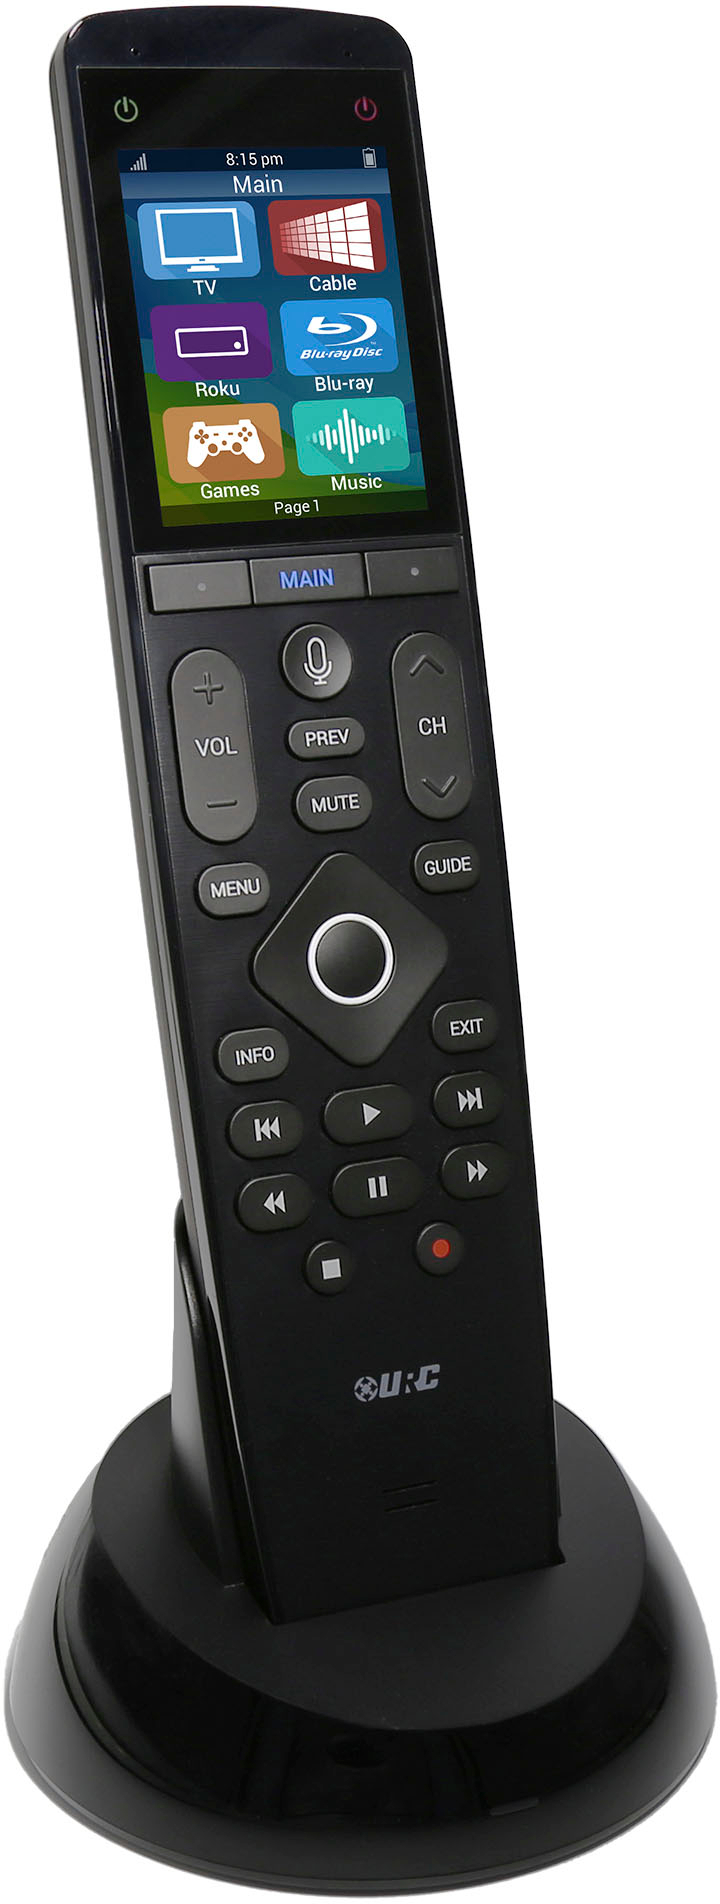 Angle View: Universal Remote Control - RF Remote Control with Vibrant 2.0" LCD - Black